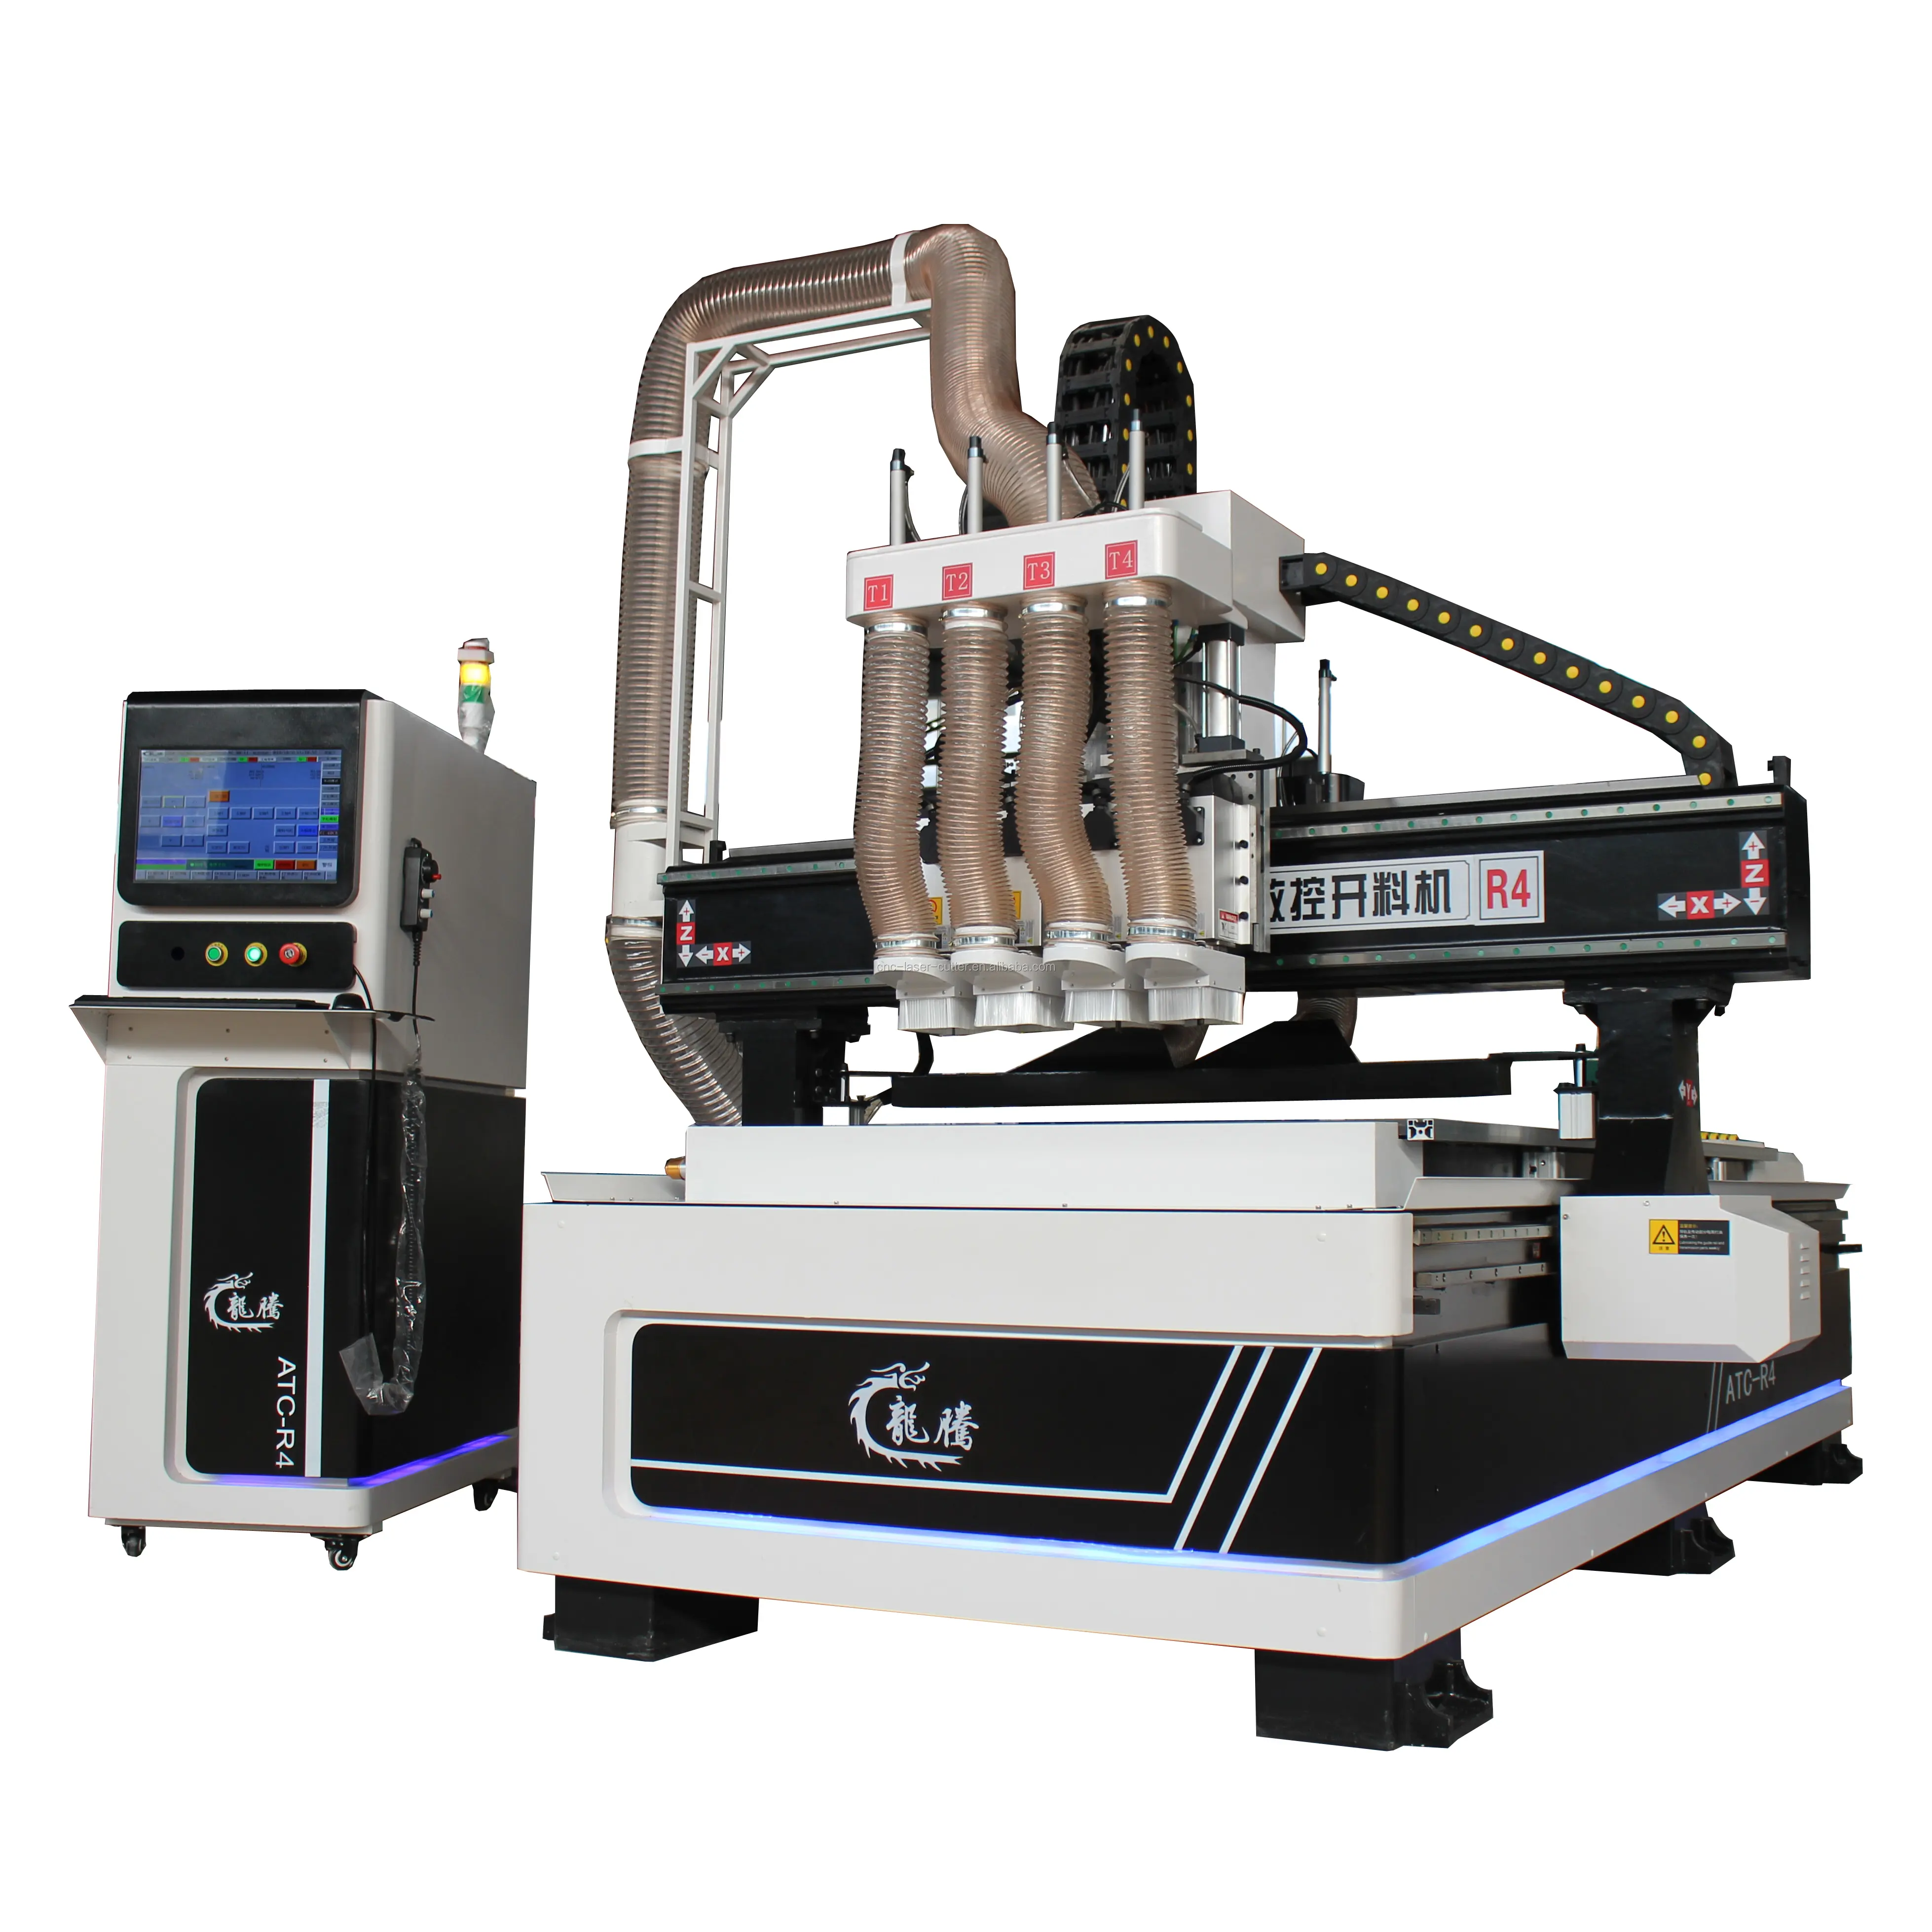 Jinan Multi use CNC Router Atc Woodworking Machine for Engraving and Cutting with atc woodworking cnc router